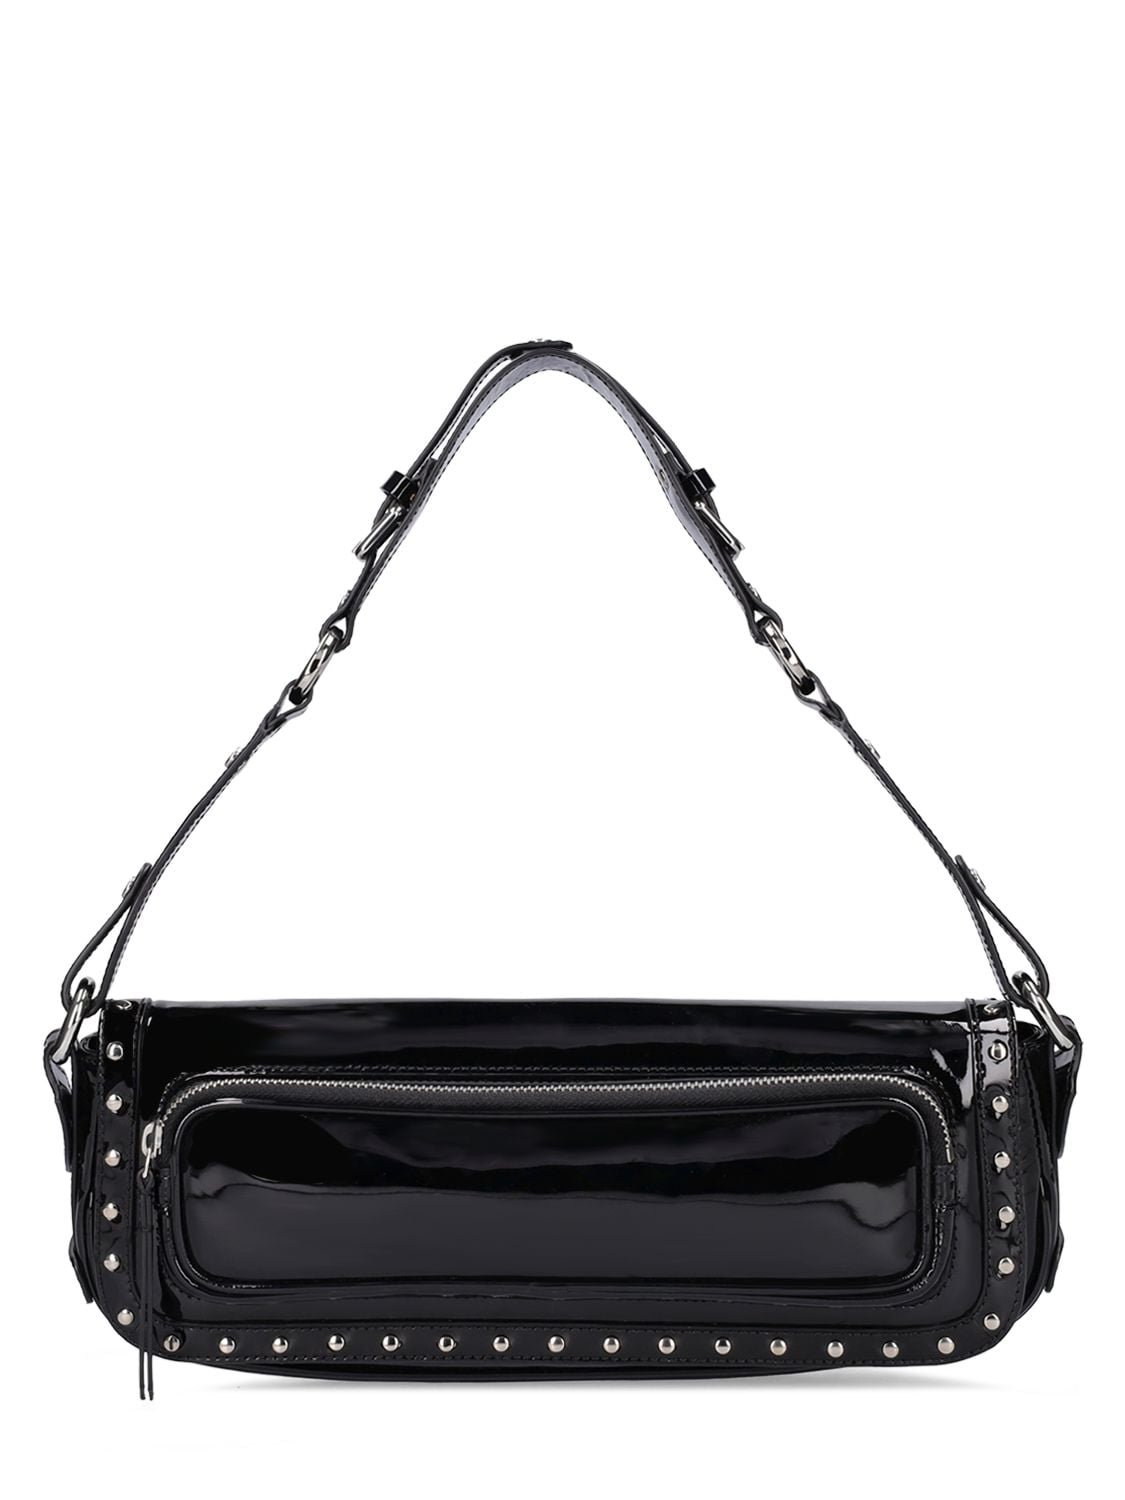 BY FAR MADDY PATENT LEATHER BAG